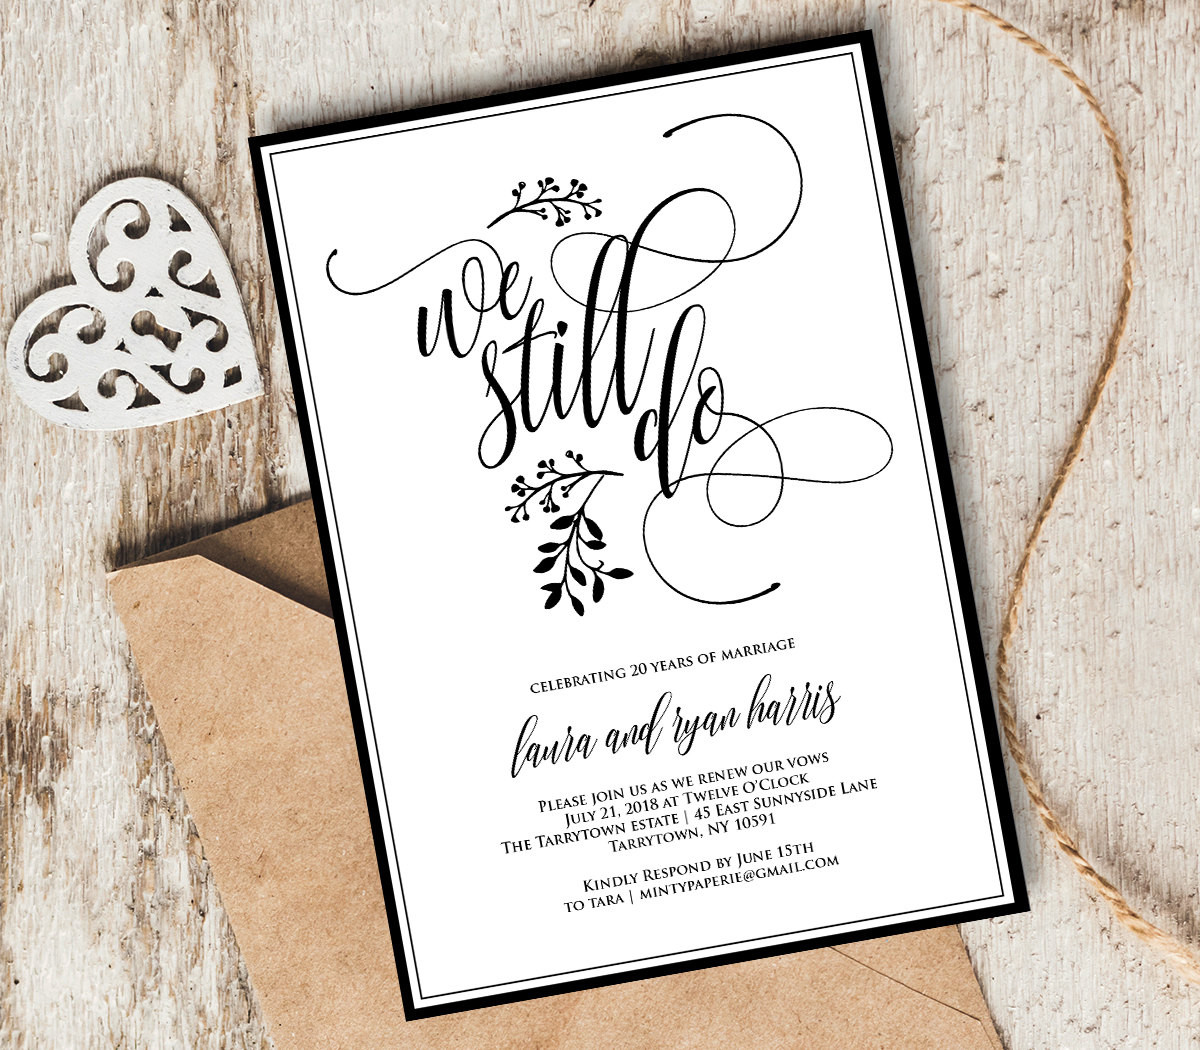 Renewal Wedding Vows
 Vow Renewal Invitation Template We Still Do Instant